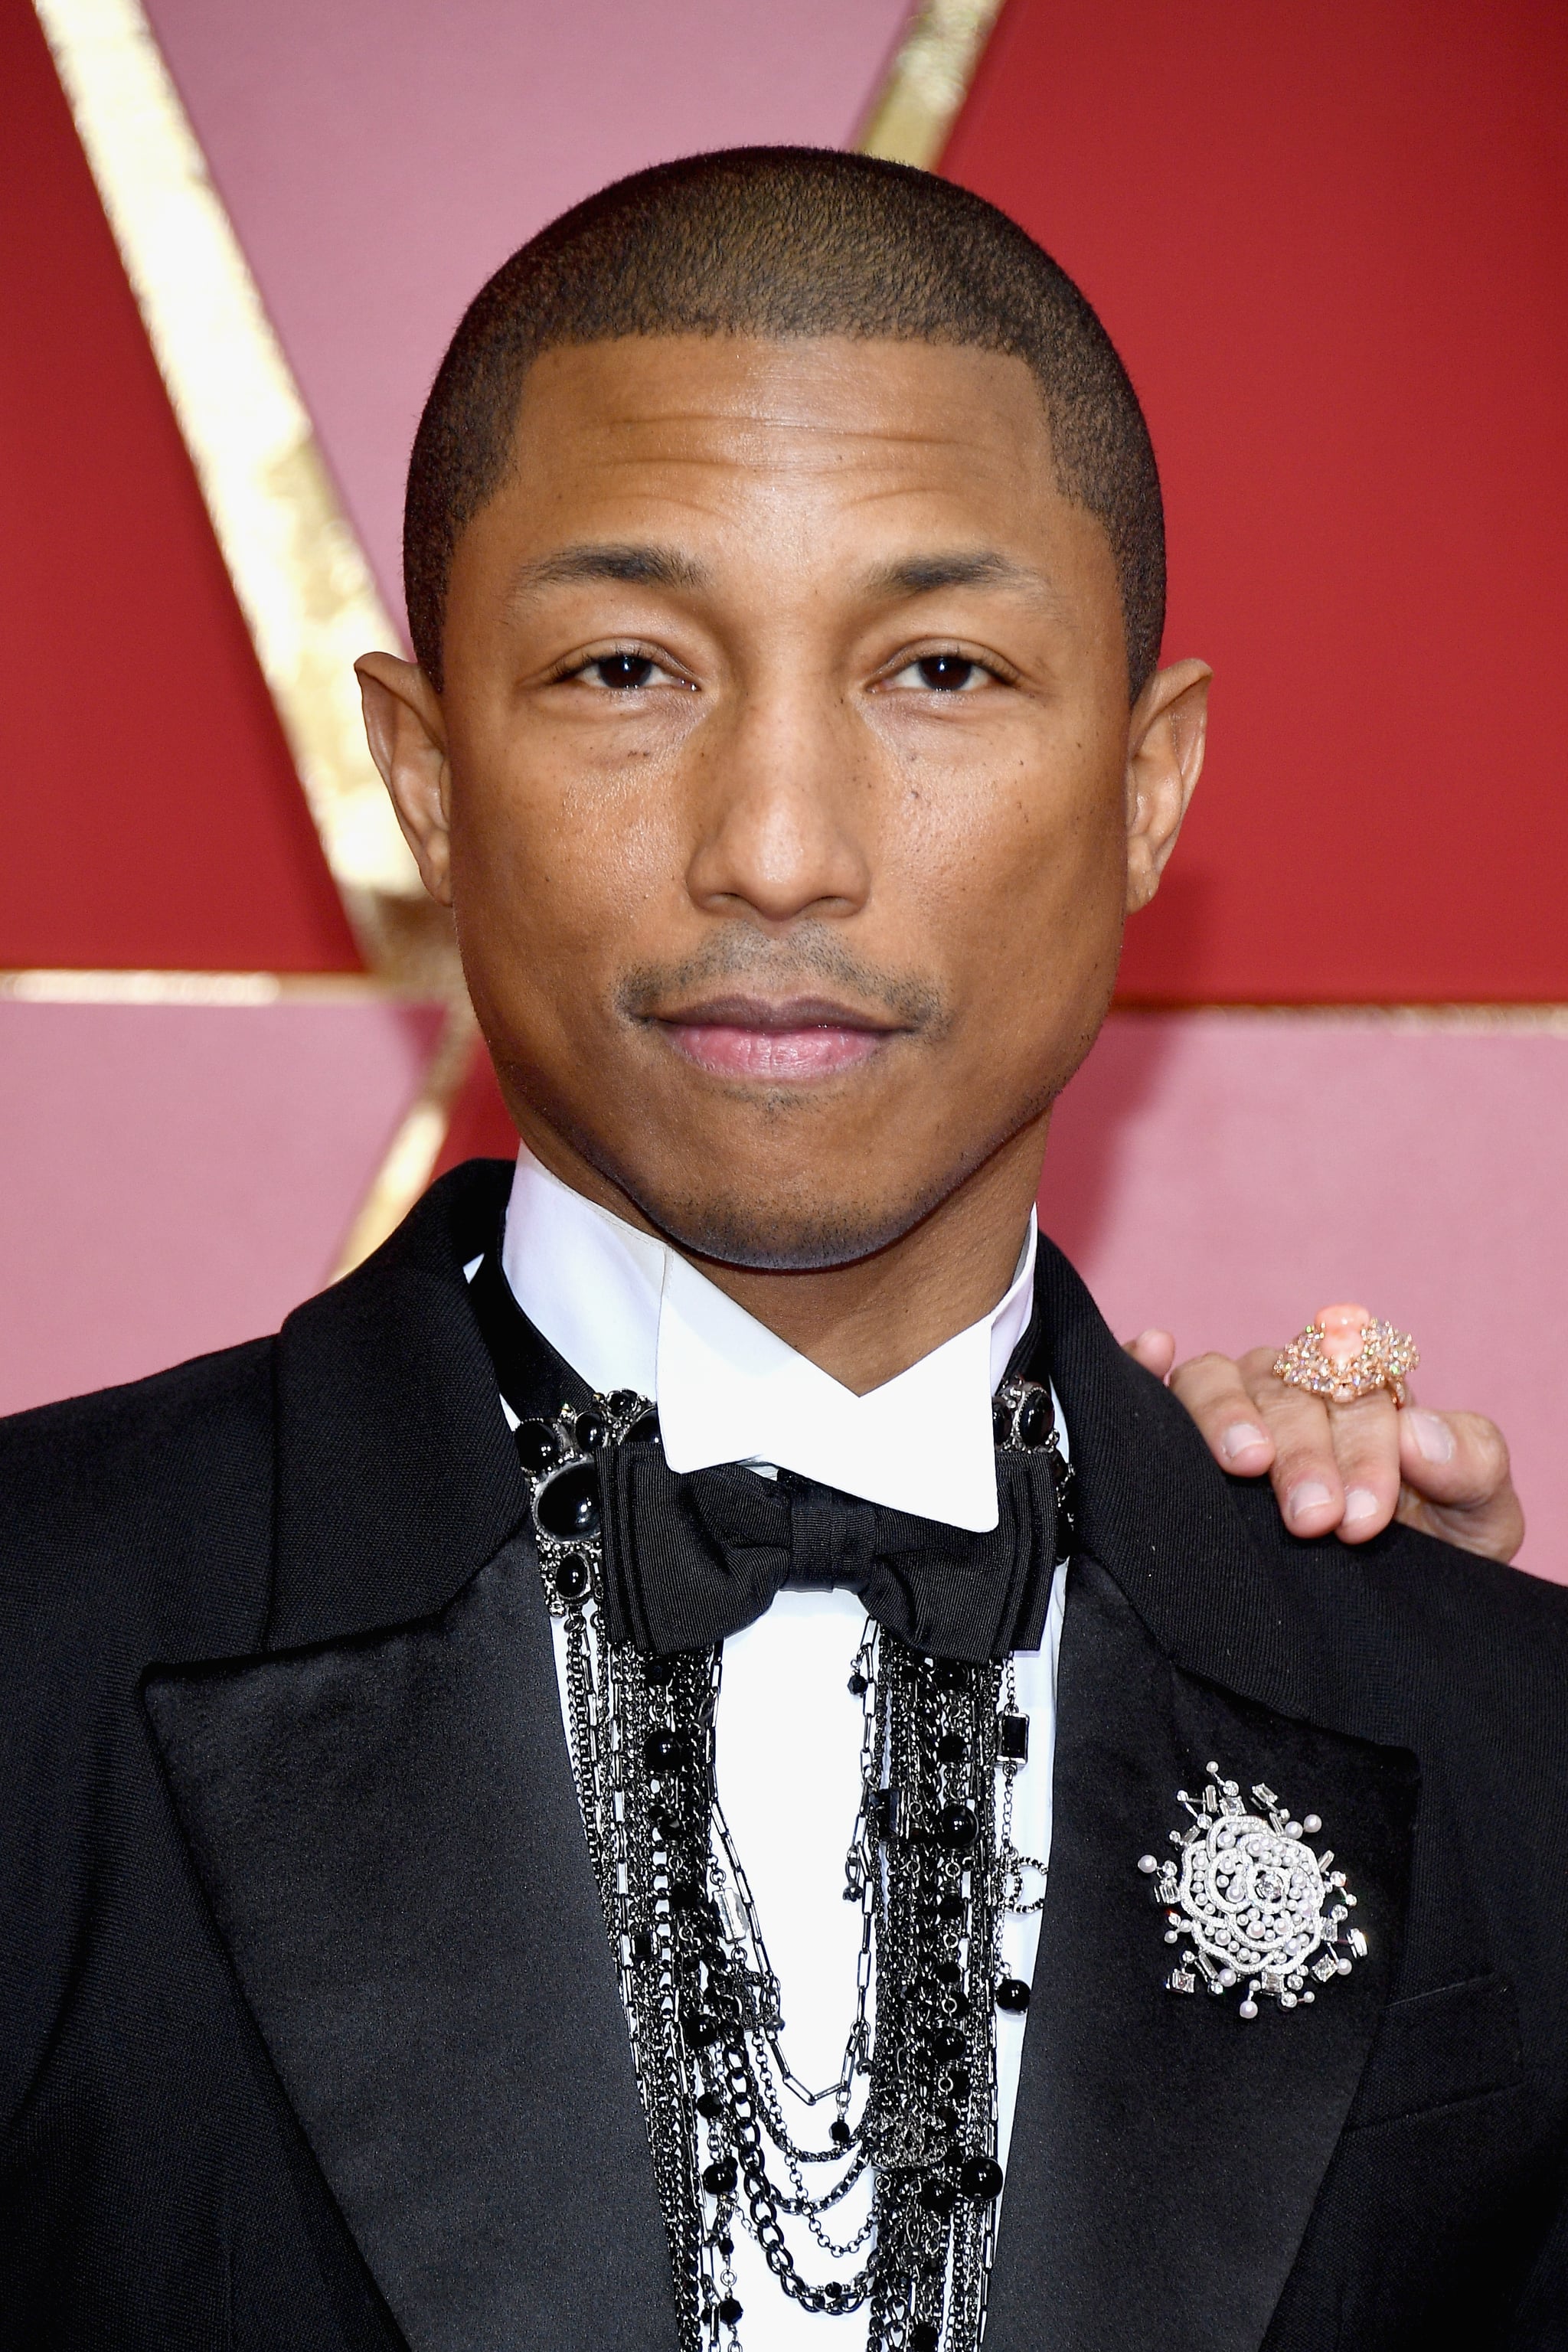 2020: Pharrell Williams, A Timeline of All of the Celebrity Beauty Brands  That Have Launched Since the '90s